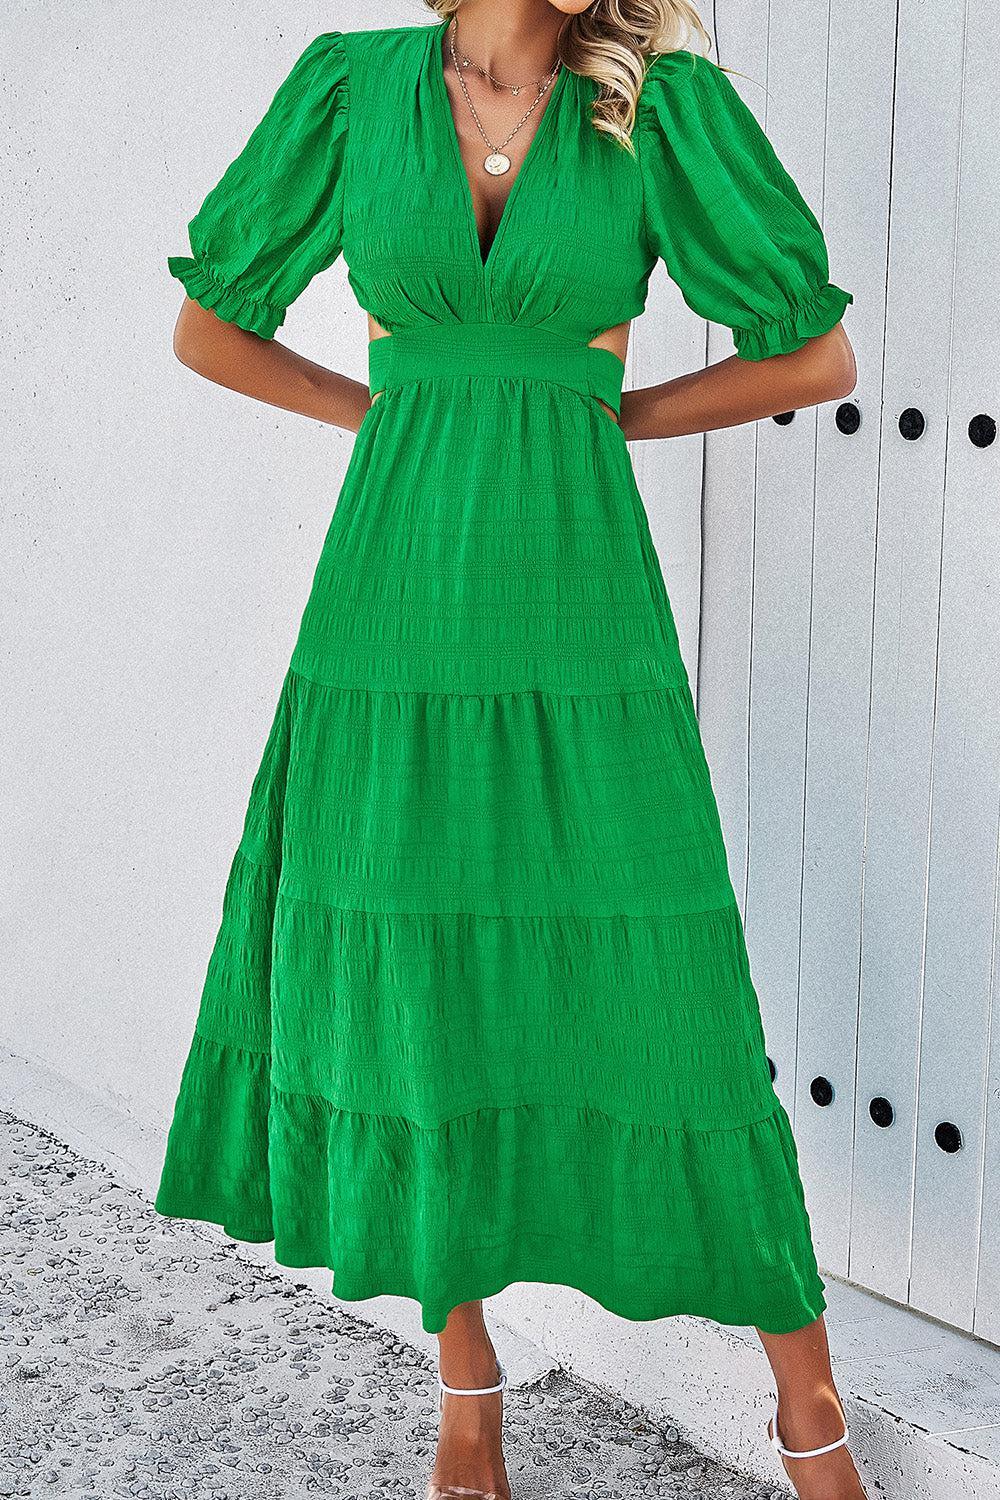 a woman in a green dress posing for a picture